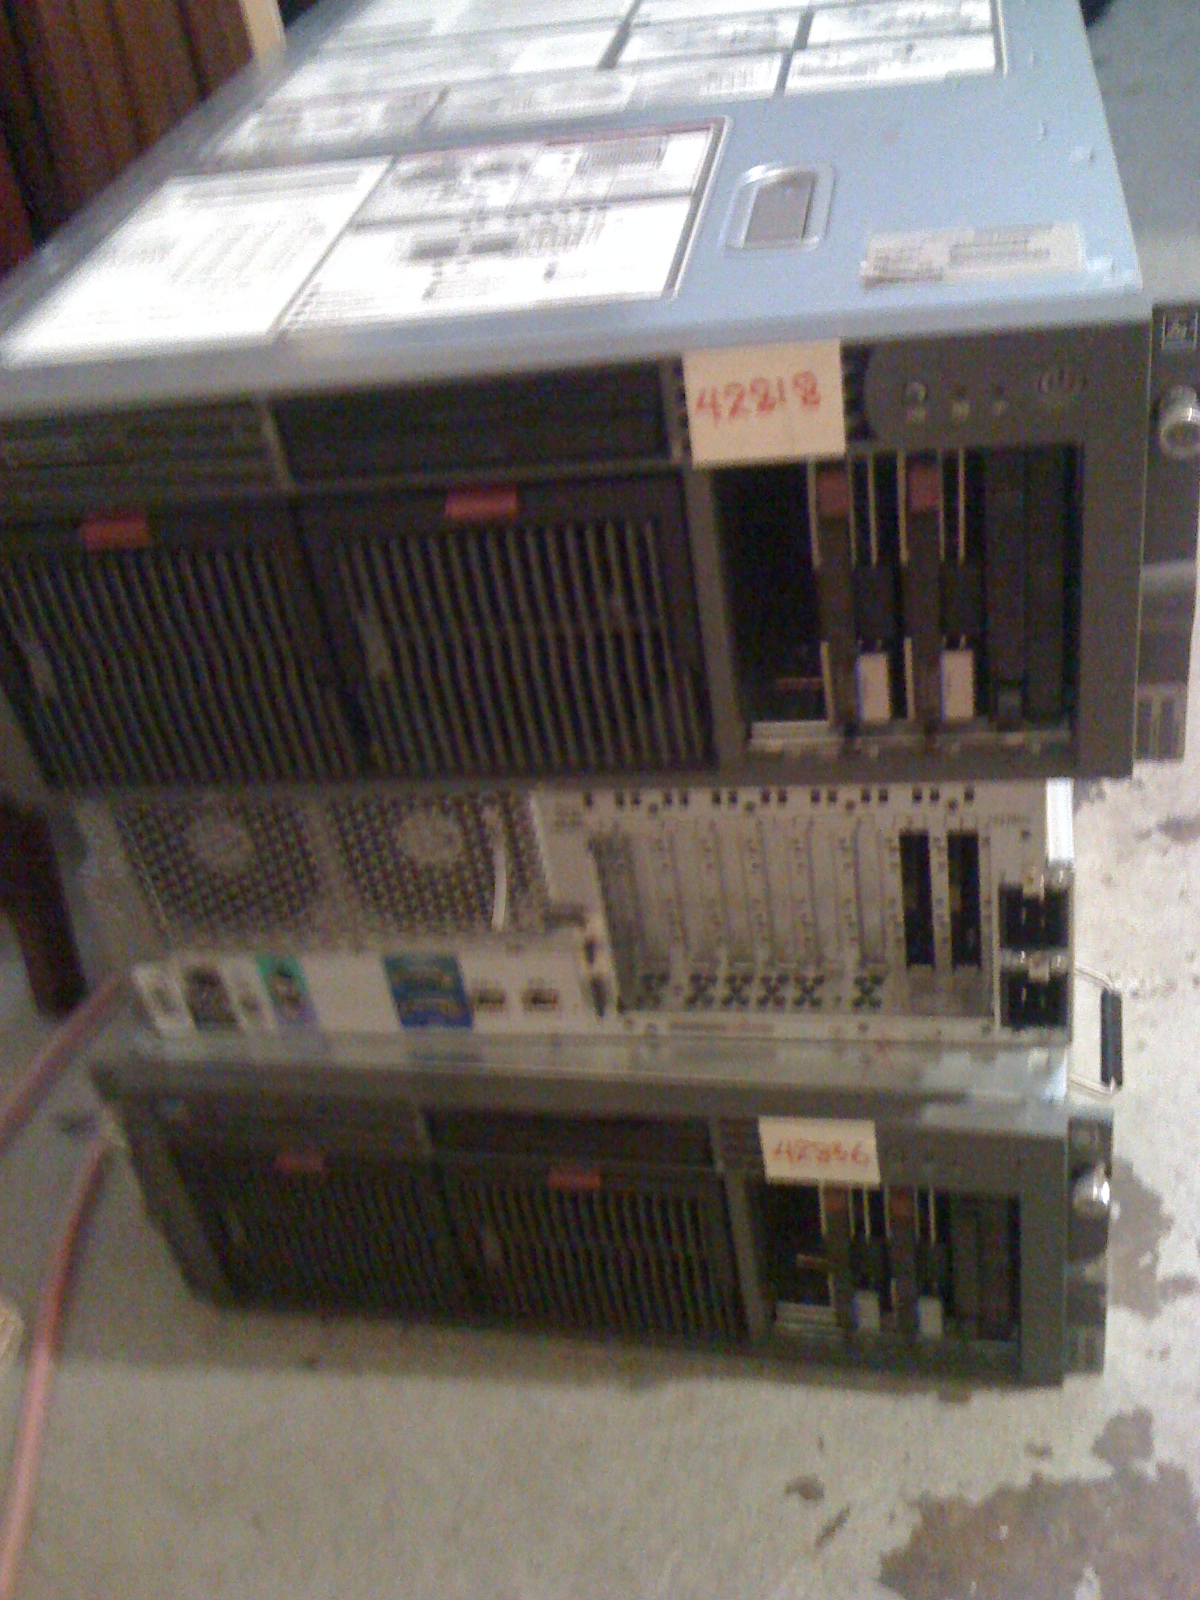 the new hp enterprise servers, they are still attached to each other